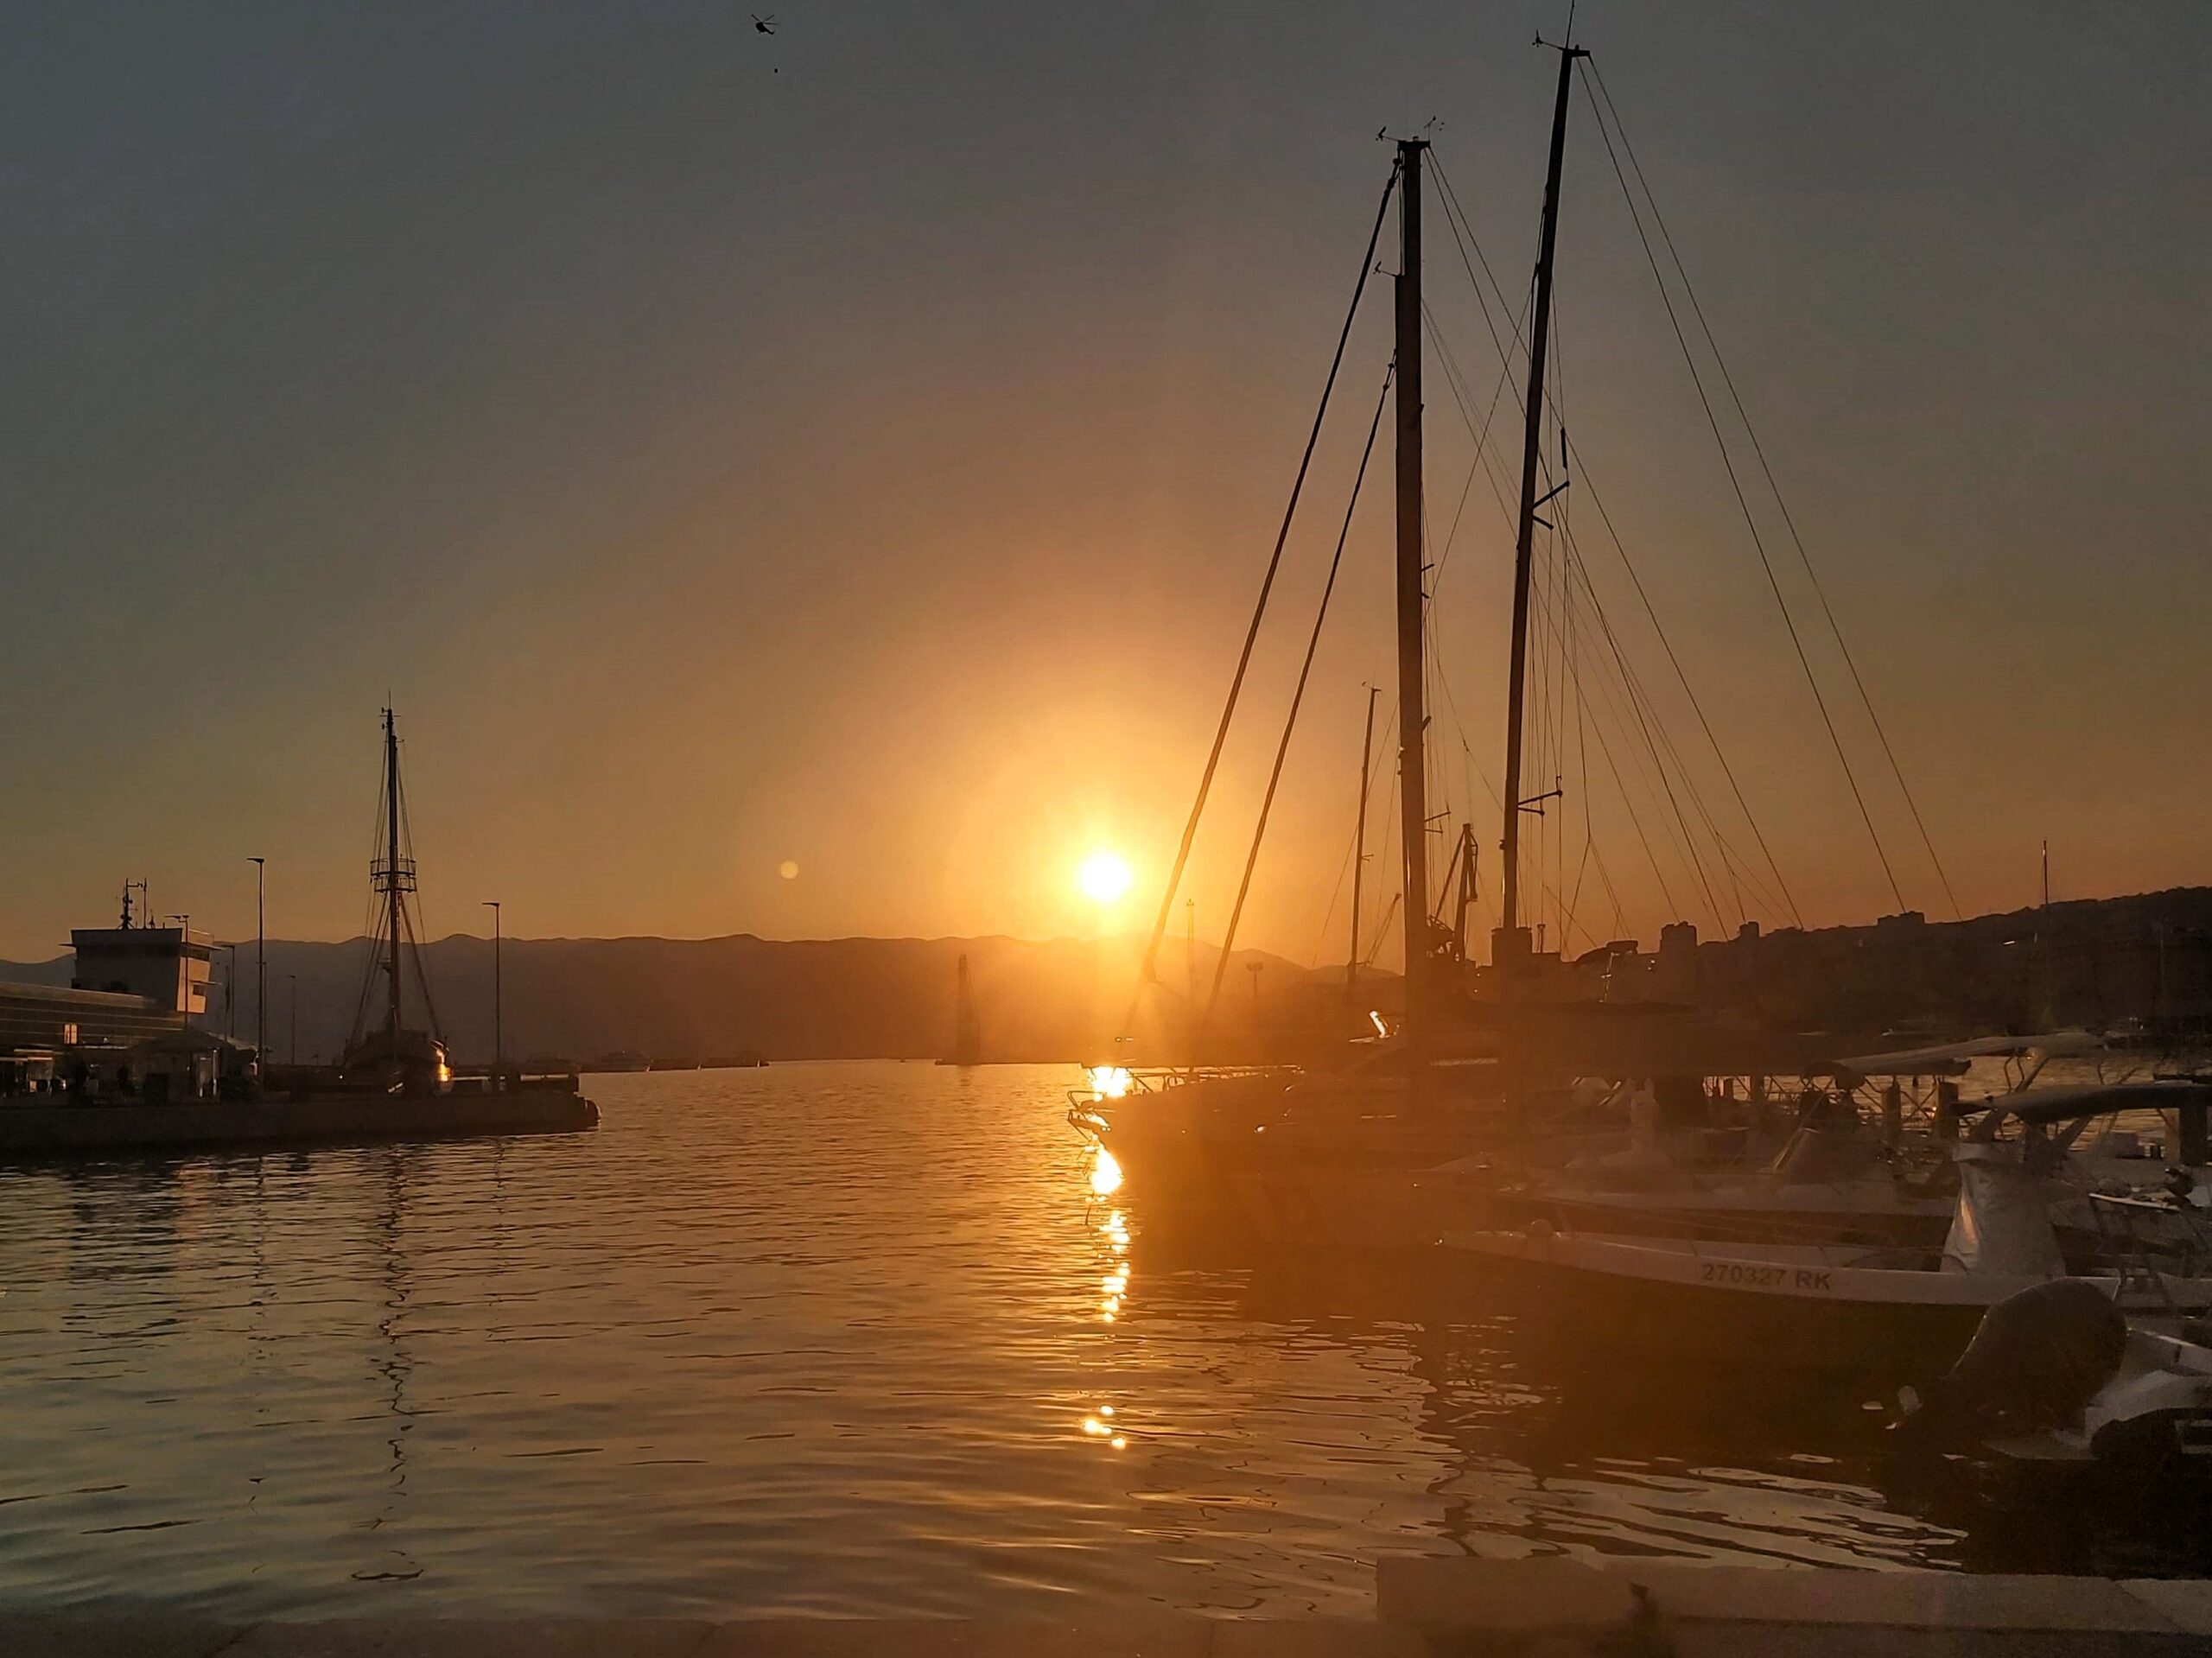 Sunset view of the harbour with boats, Rijeka, Croatia